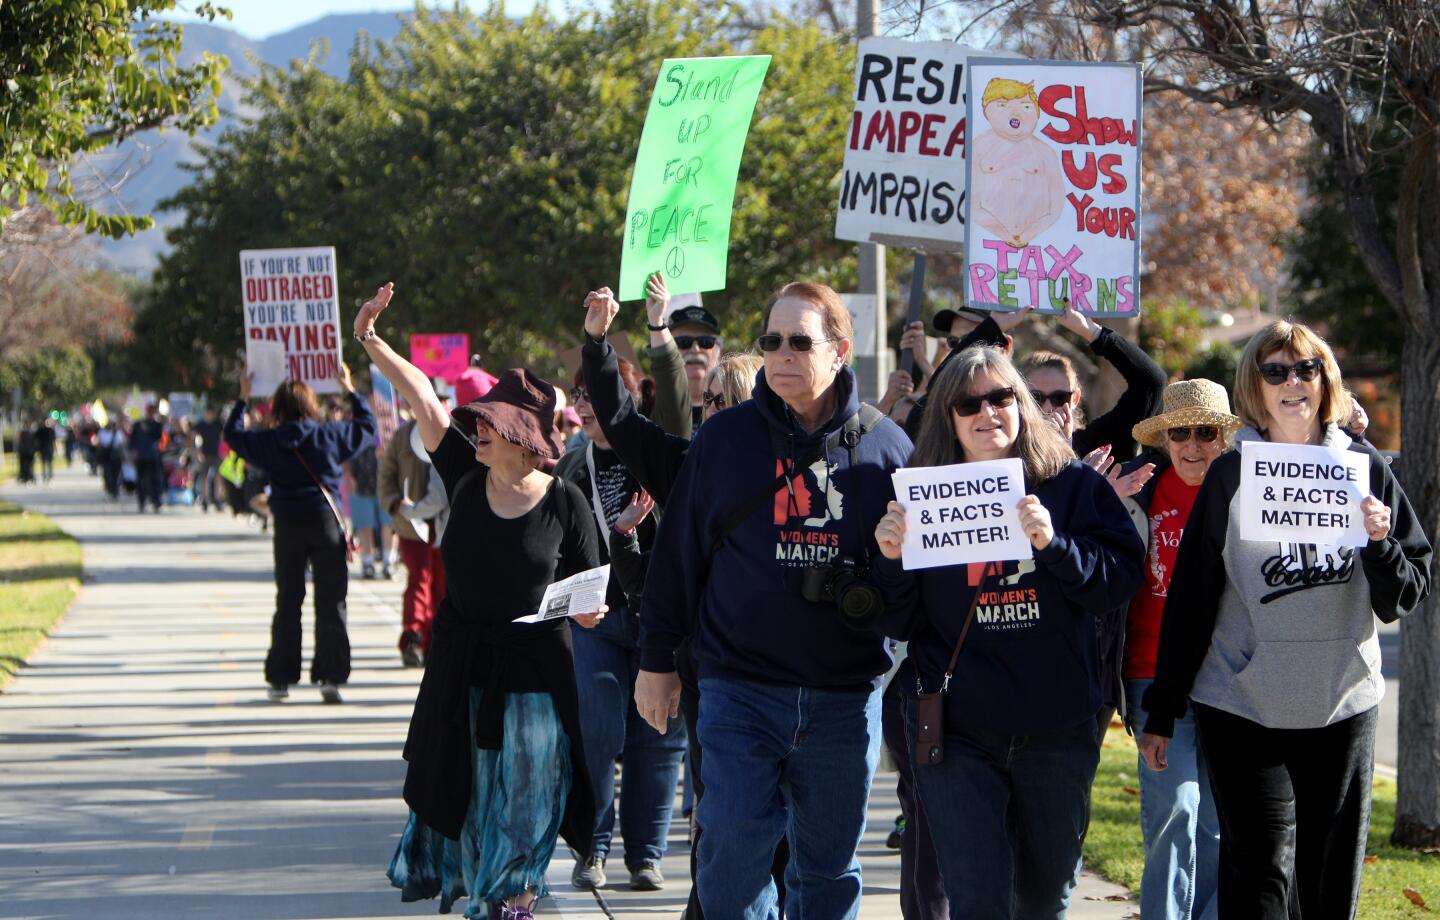 Hundreds like, from left, Larry and Susan Rosenberg and Pam Springs marched with signs during the Women's March on the Chandler Bikeway in Burbank on Saturday, Jan. 18, 2020.